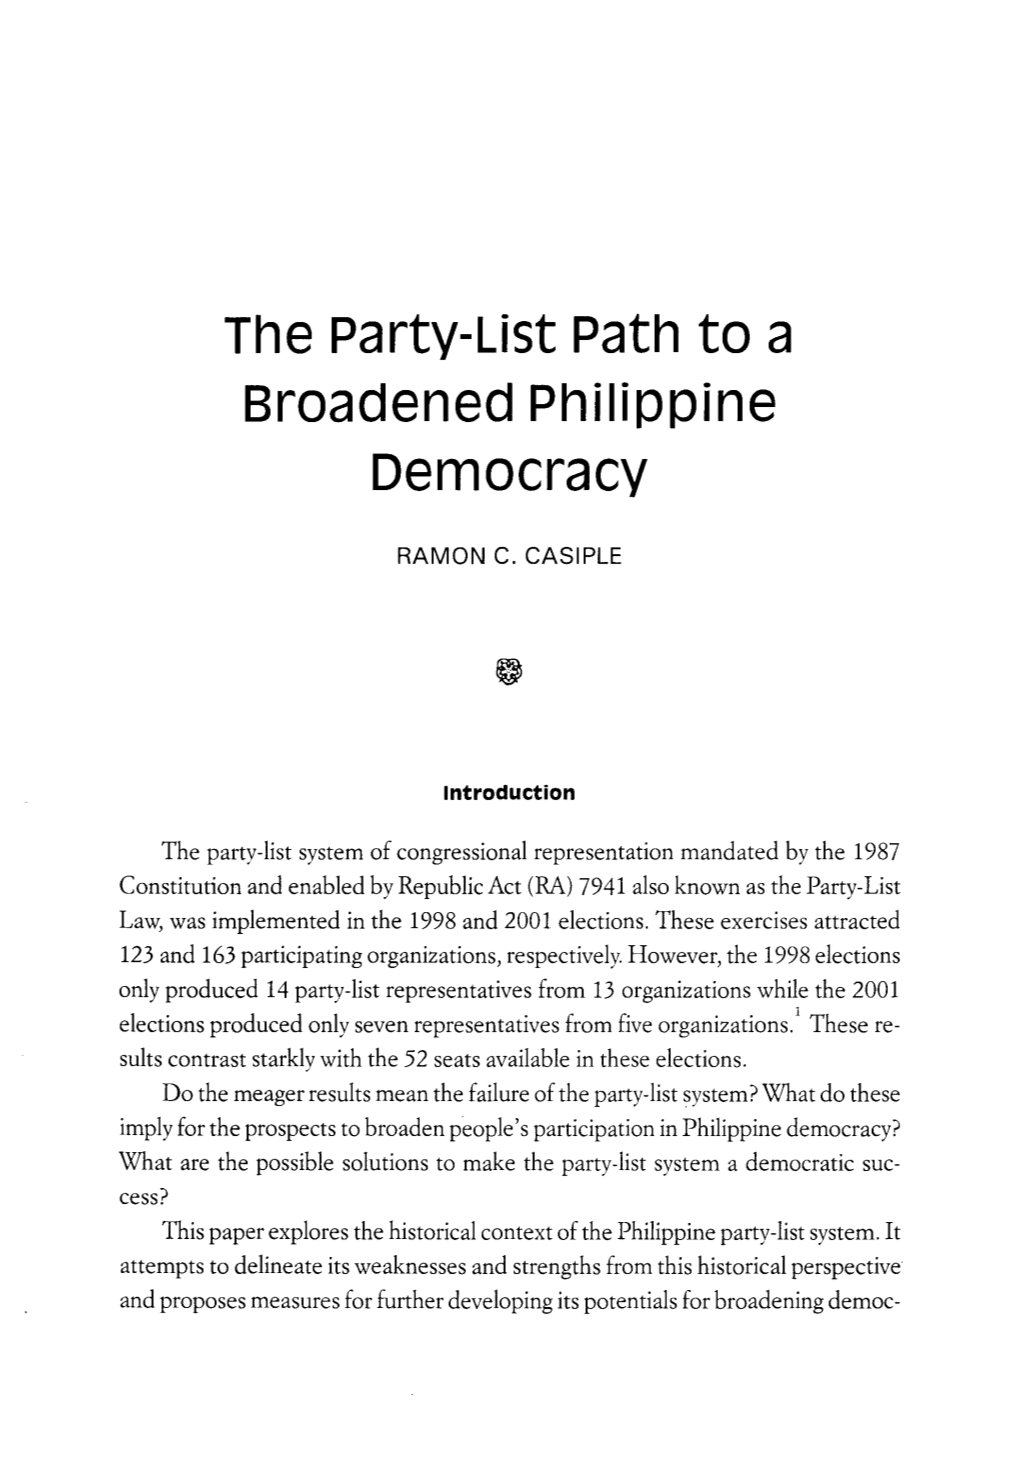 The Party-List Path to a Broadened Philippine Democracy